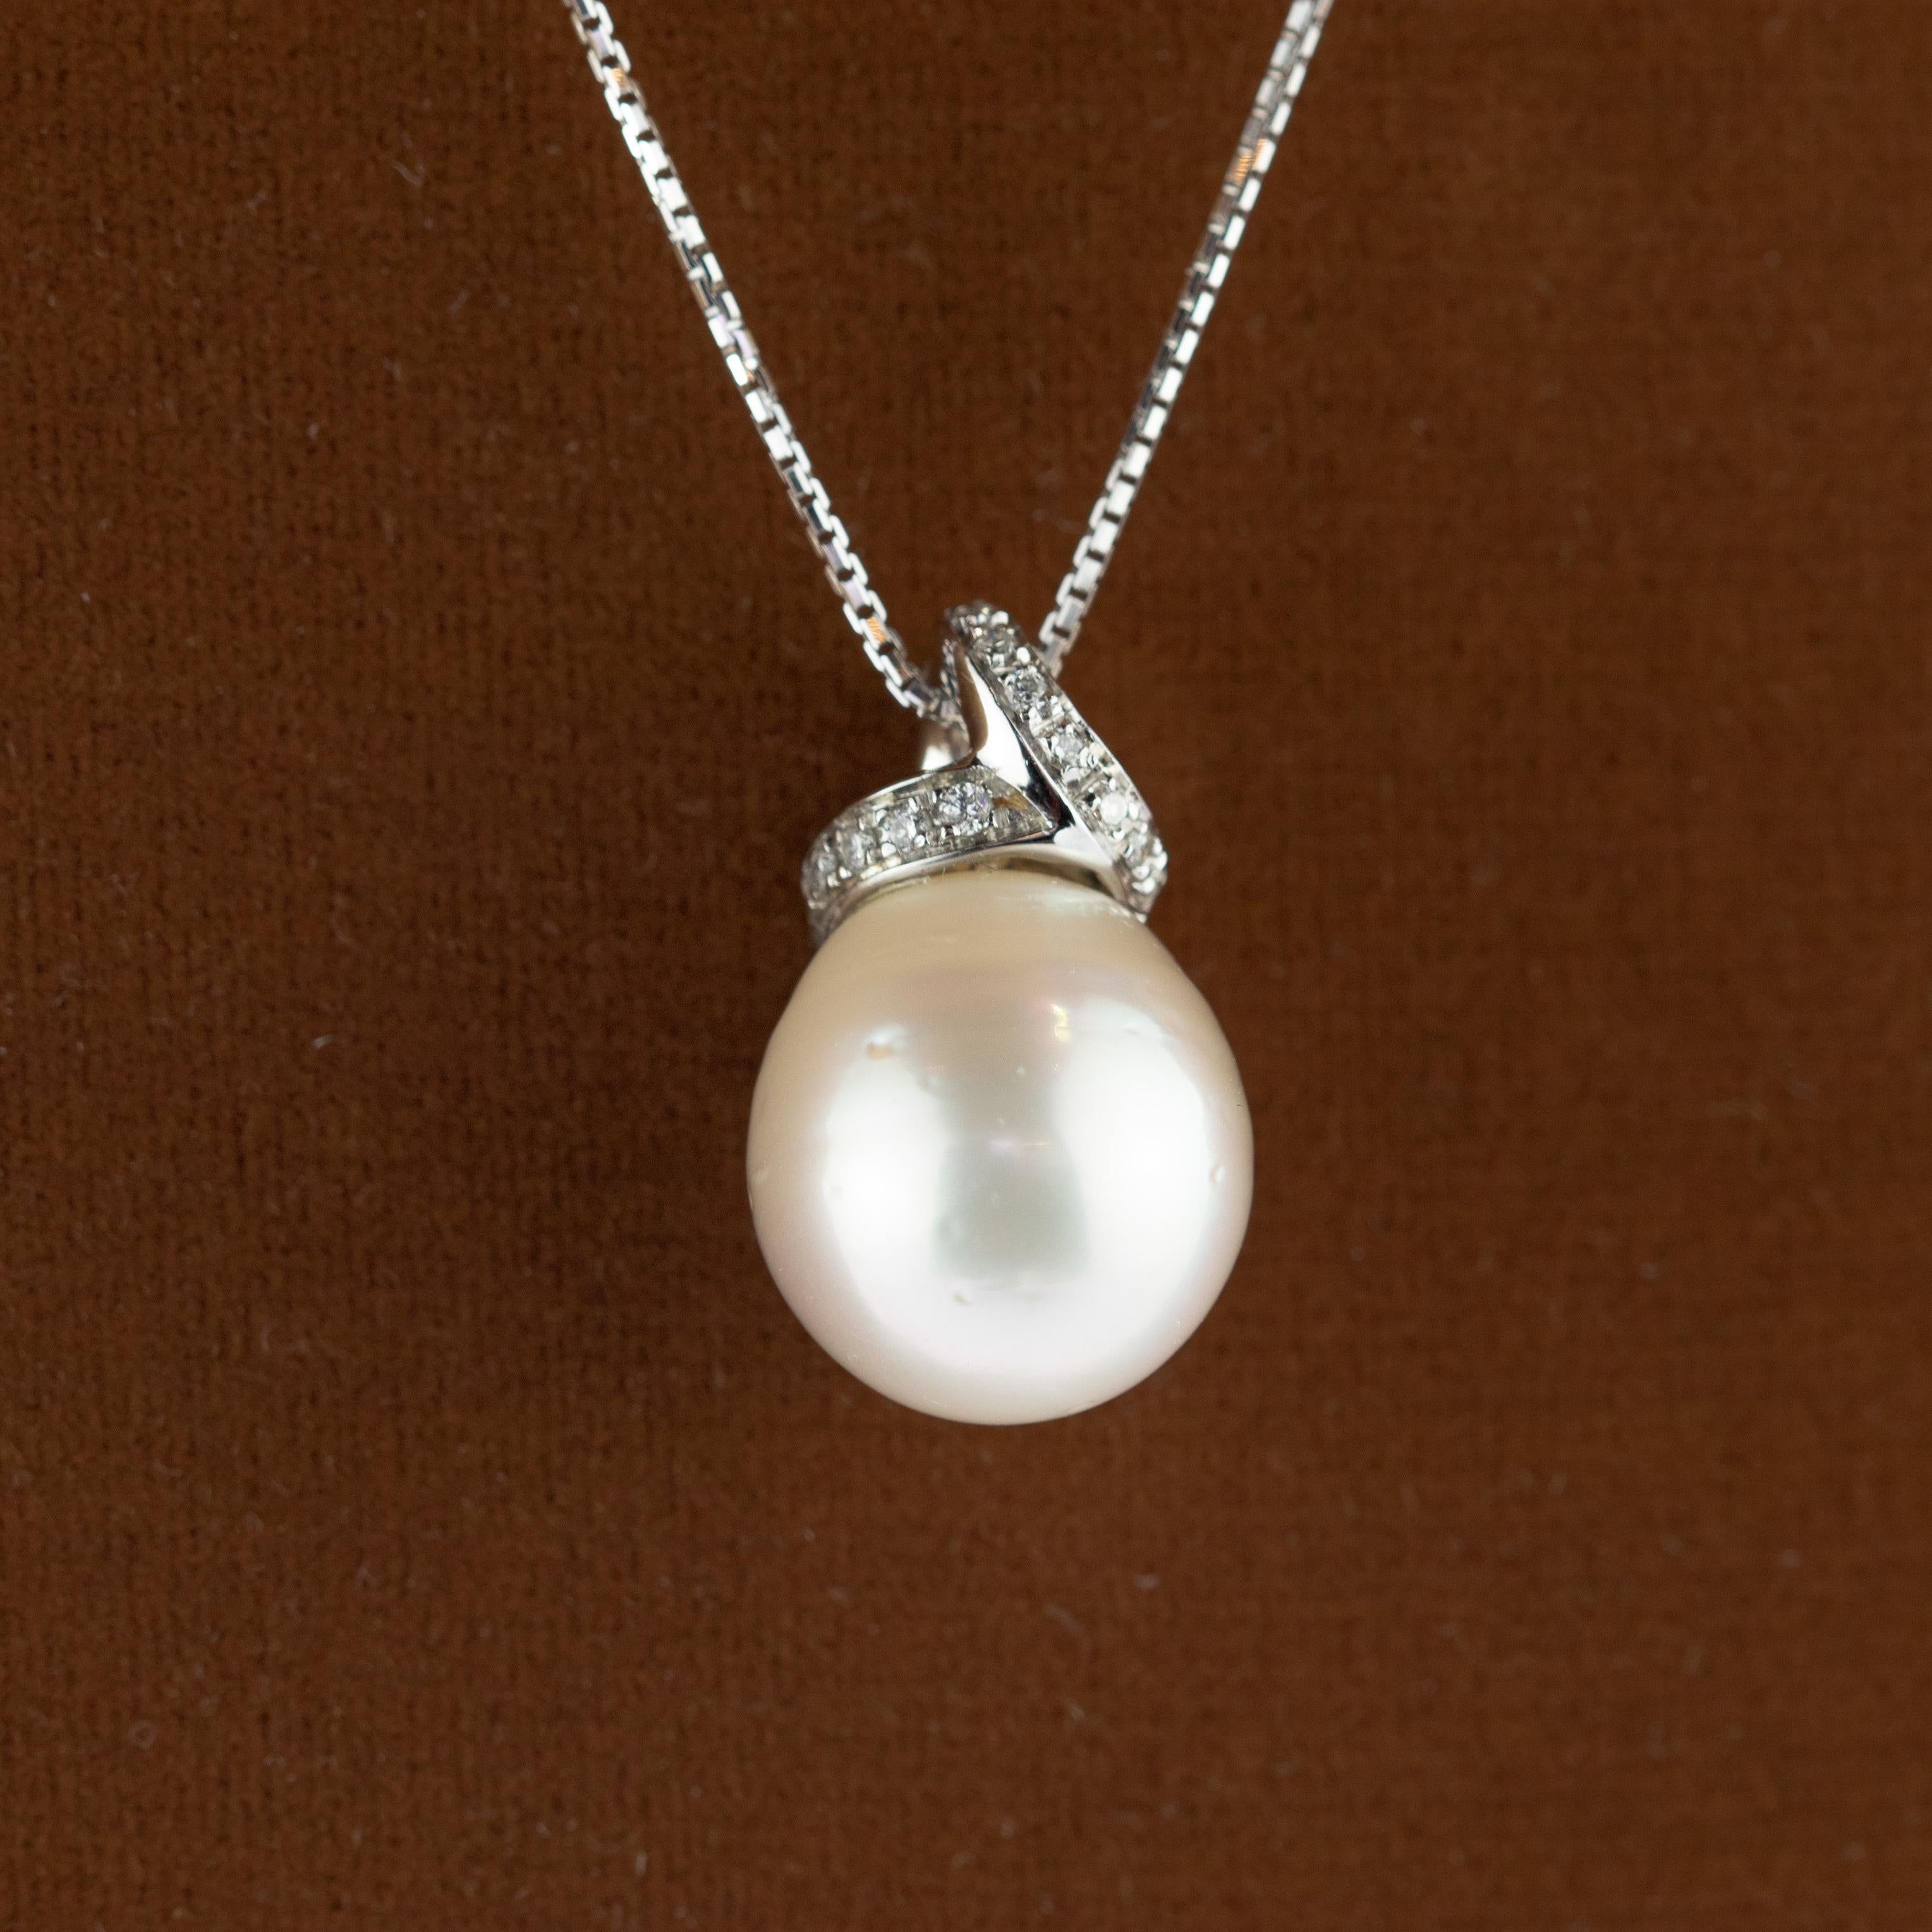 Intini Jewels Pearl Diamond Pendant 18 Karat White Gold Crafted Chain Necklace In New Condition For Sale In Milano, IT